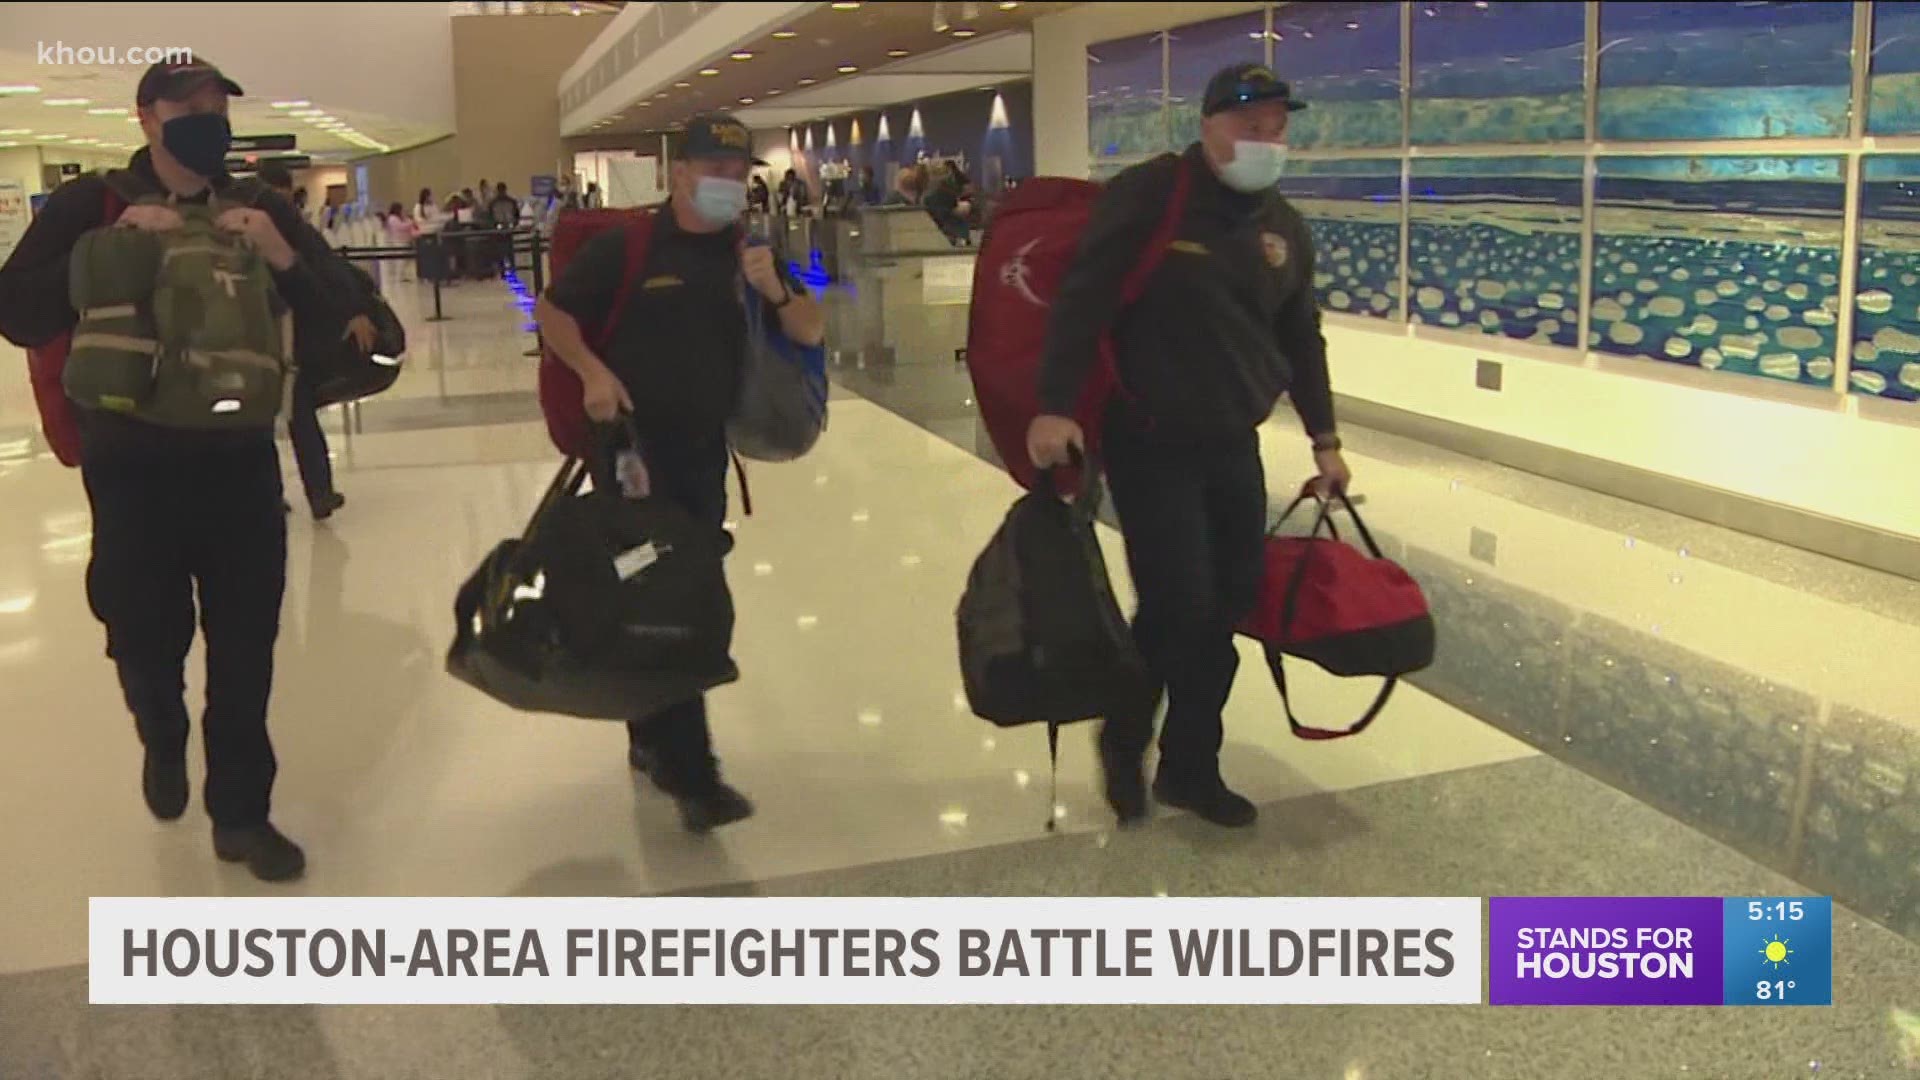 Southwest is waiving fares for 170 firefighters from across Texas flying out Tuesday, including more than 40 from the Houston area.